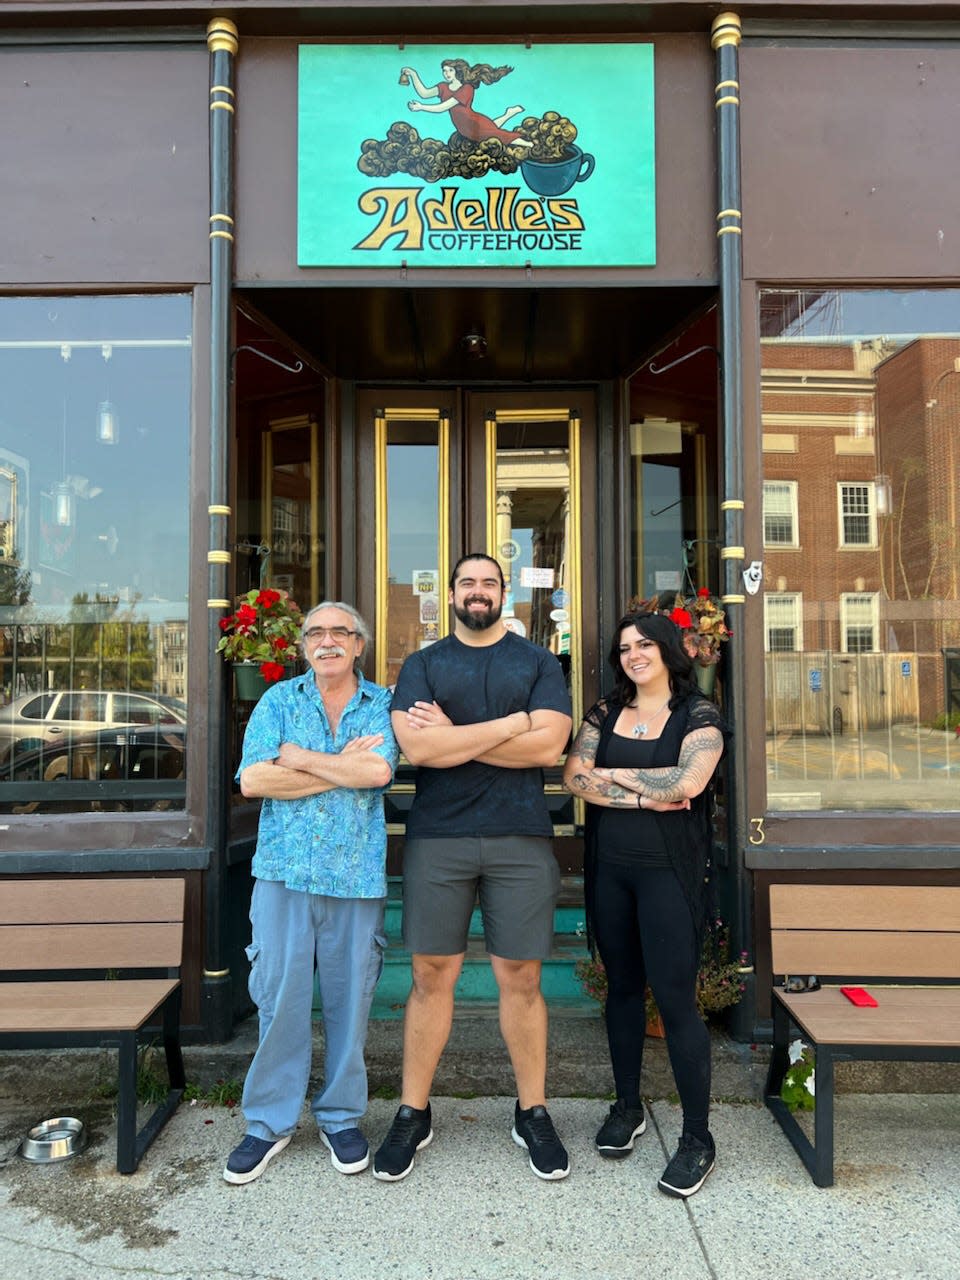 The Portsmouth Caffe Kilim family, from left, Yalcin Yazgan, Ahmet Yazgan and Leyla Yazgan, are the new owners of Adelle's Coffeehouse in Dover.